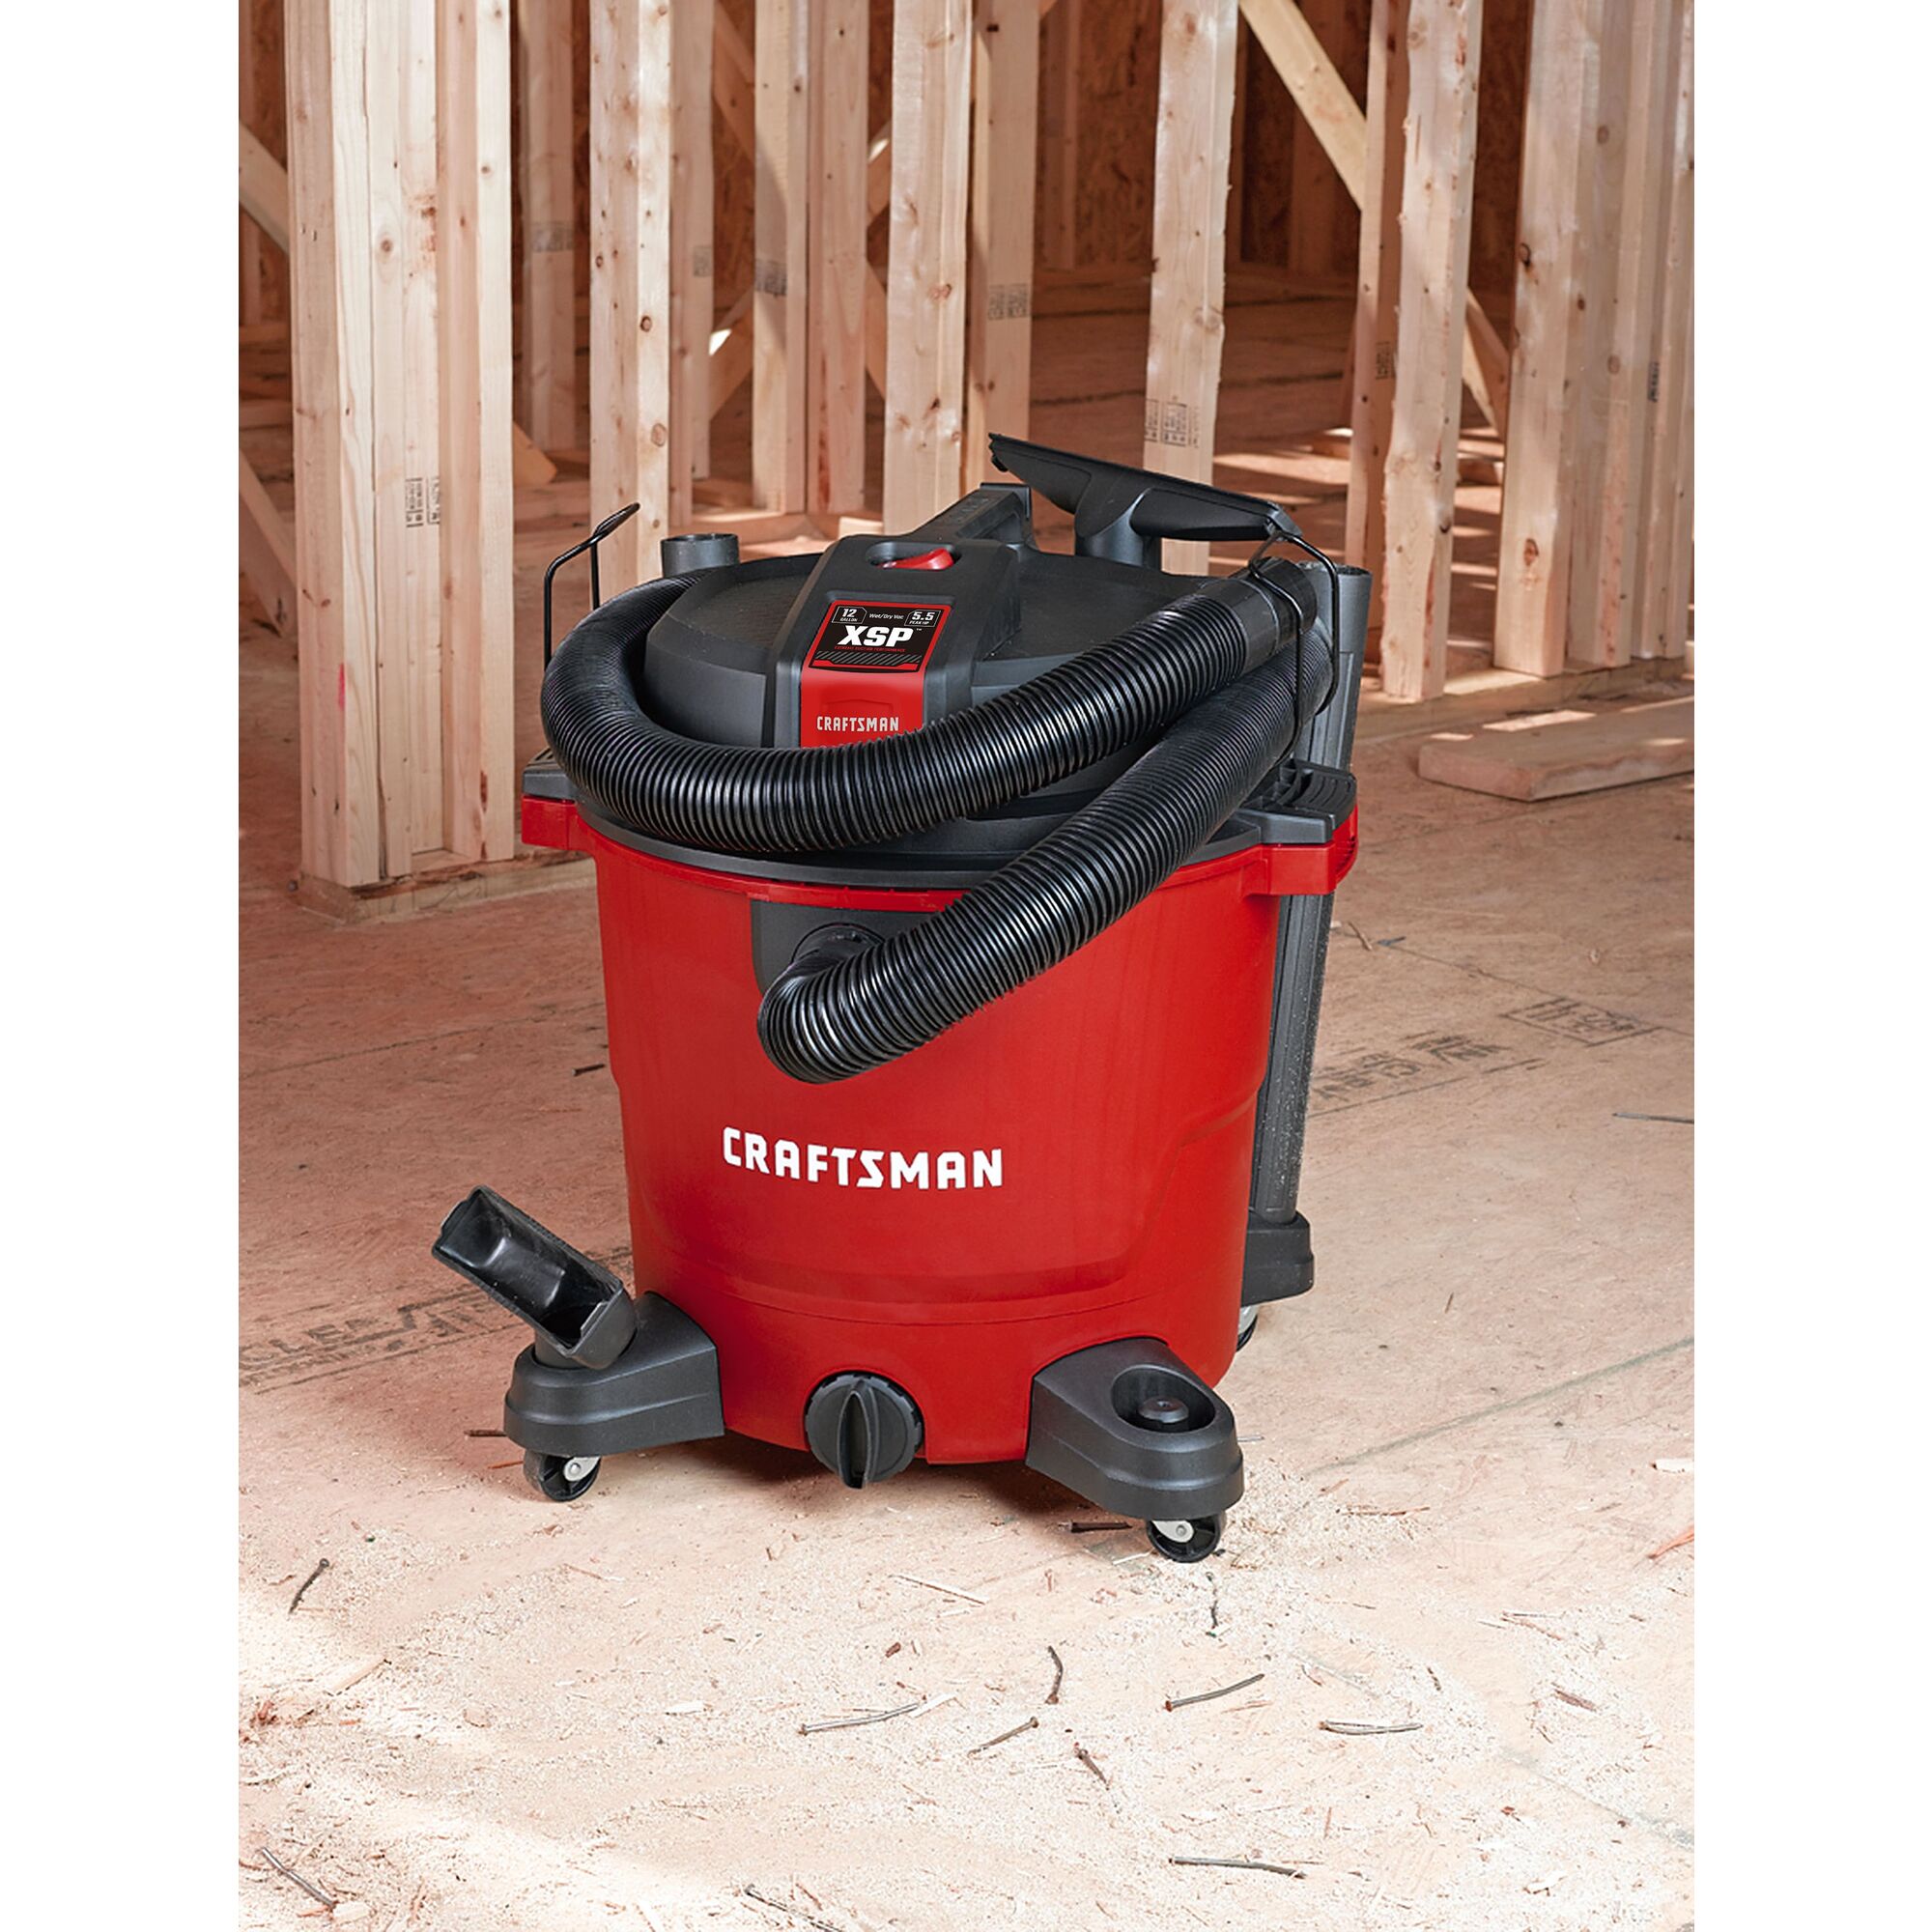 View of CRAFTSMAN Vacuums: Wet/Dry Shop Vac in environment